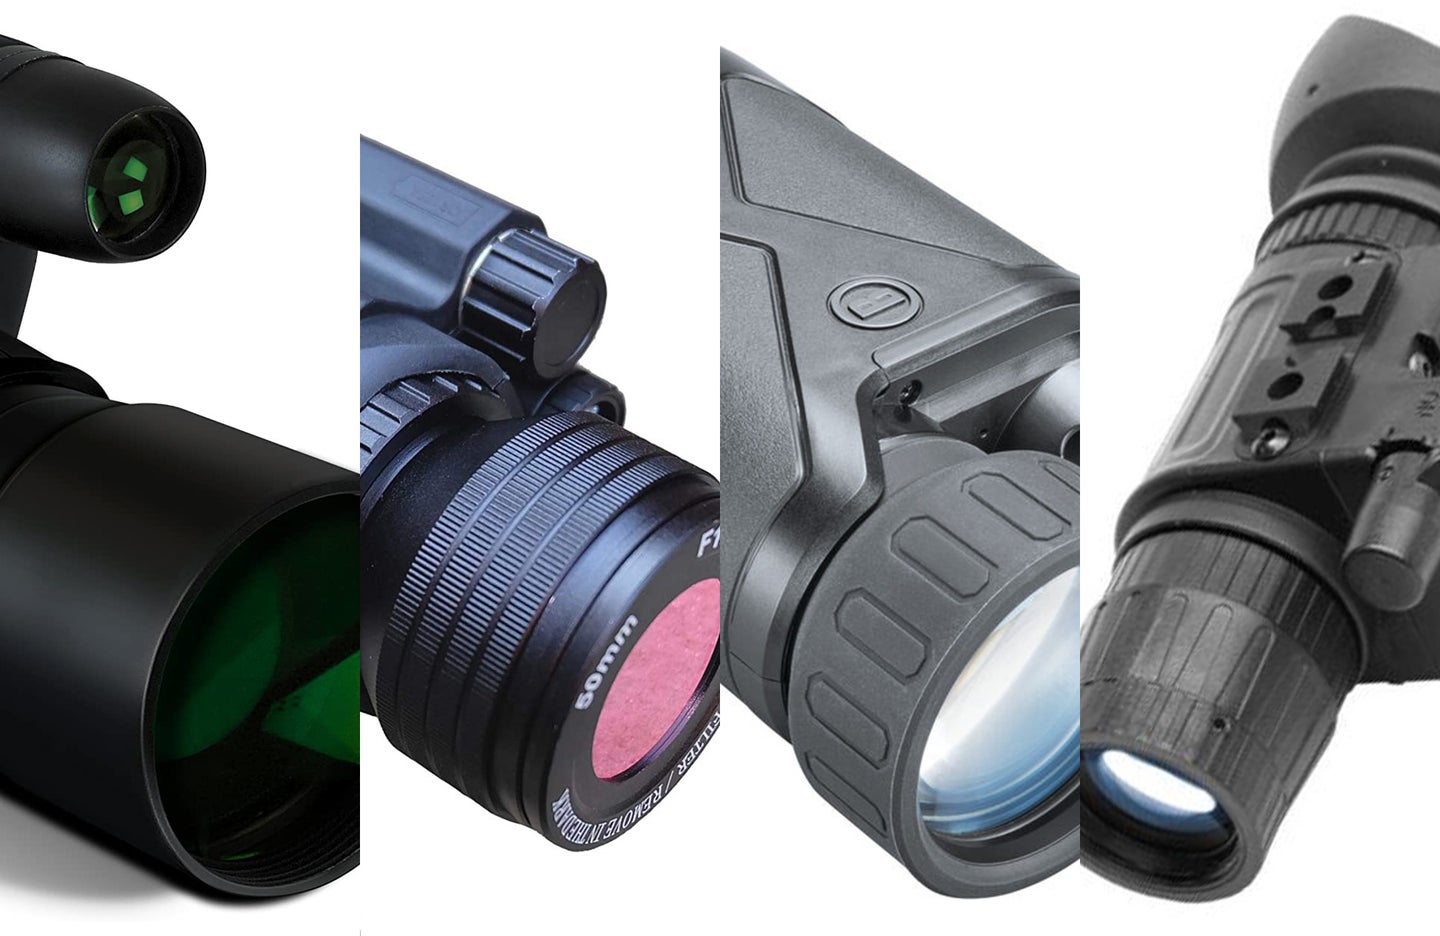 These are the best night vision monoculars.